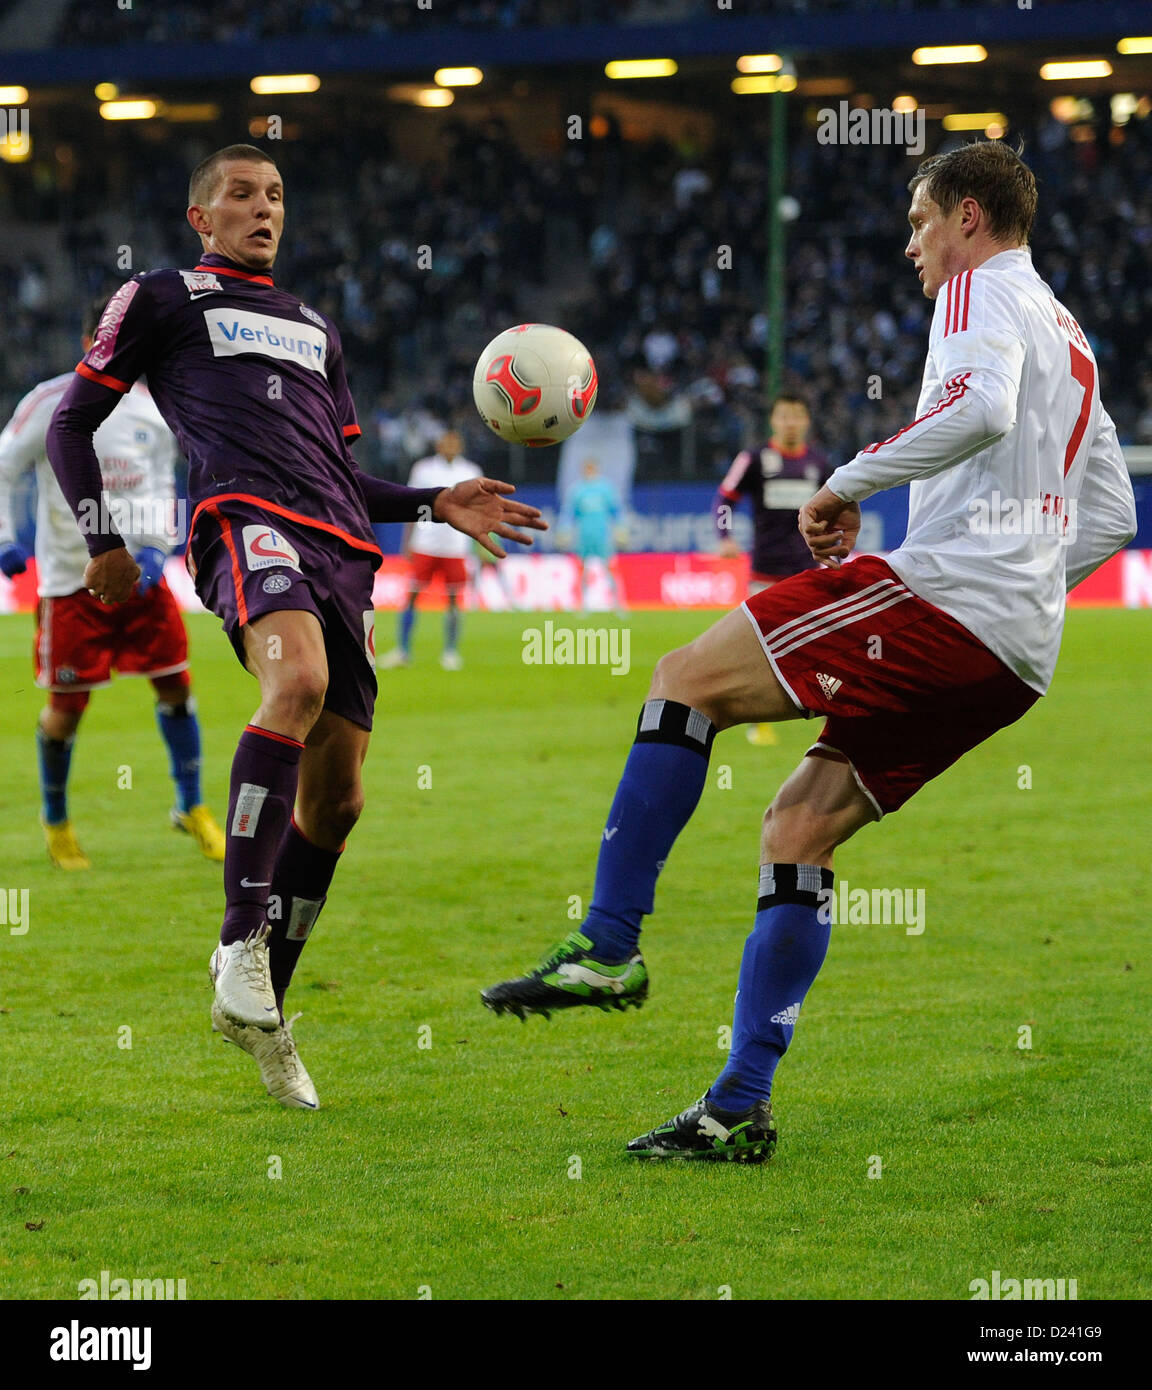 Wiens' Alexander Gorgon (L) and Hamburgs' Marcell Jansen vie for the ball during the tryout match Hamburger SV - FK Austria Wien in the Imtech-Arena in Hamburg, Germany, 12 January 2013. Photo: Axel Heimken Stock Photo